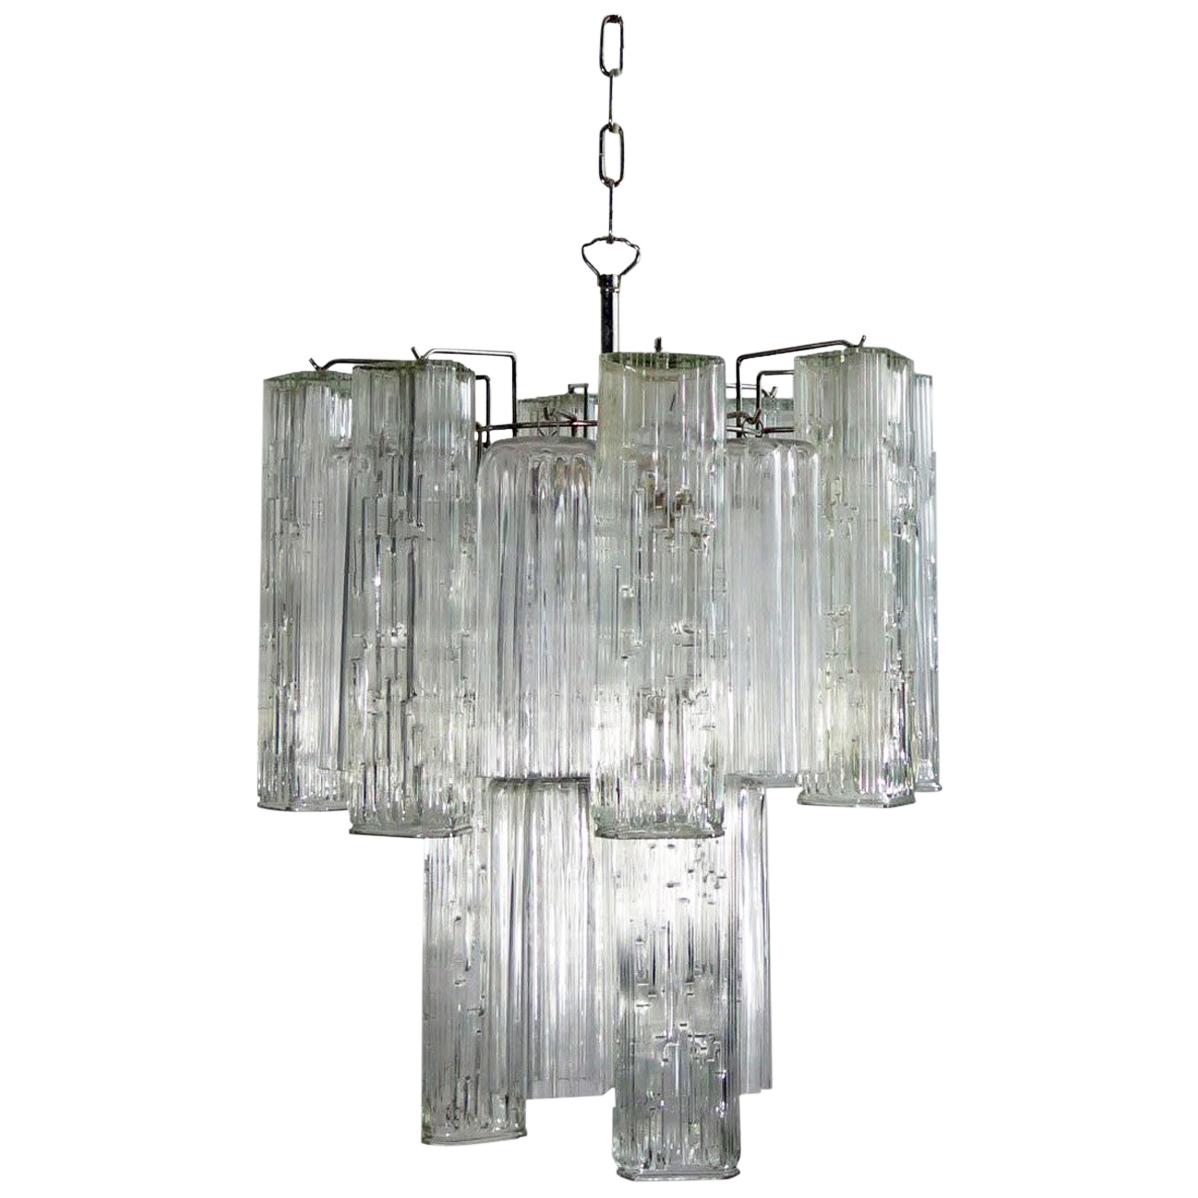 Attributed Murano Glass Chandelier Made in Italy